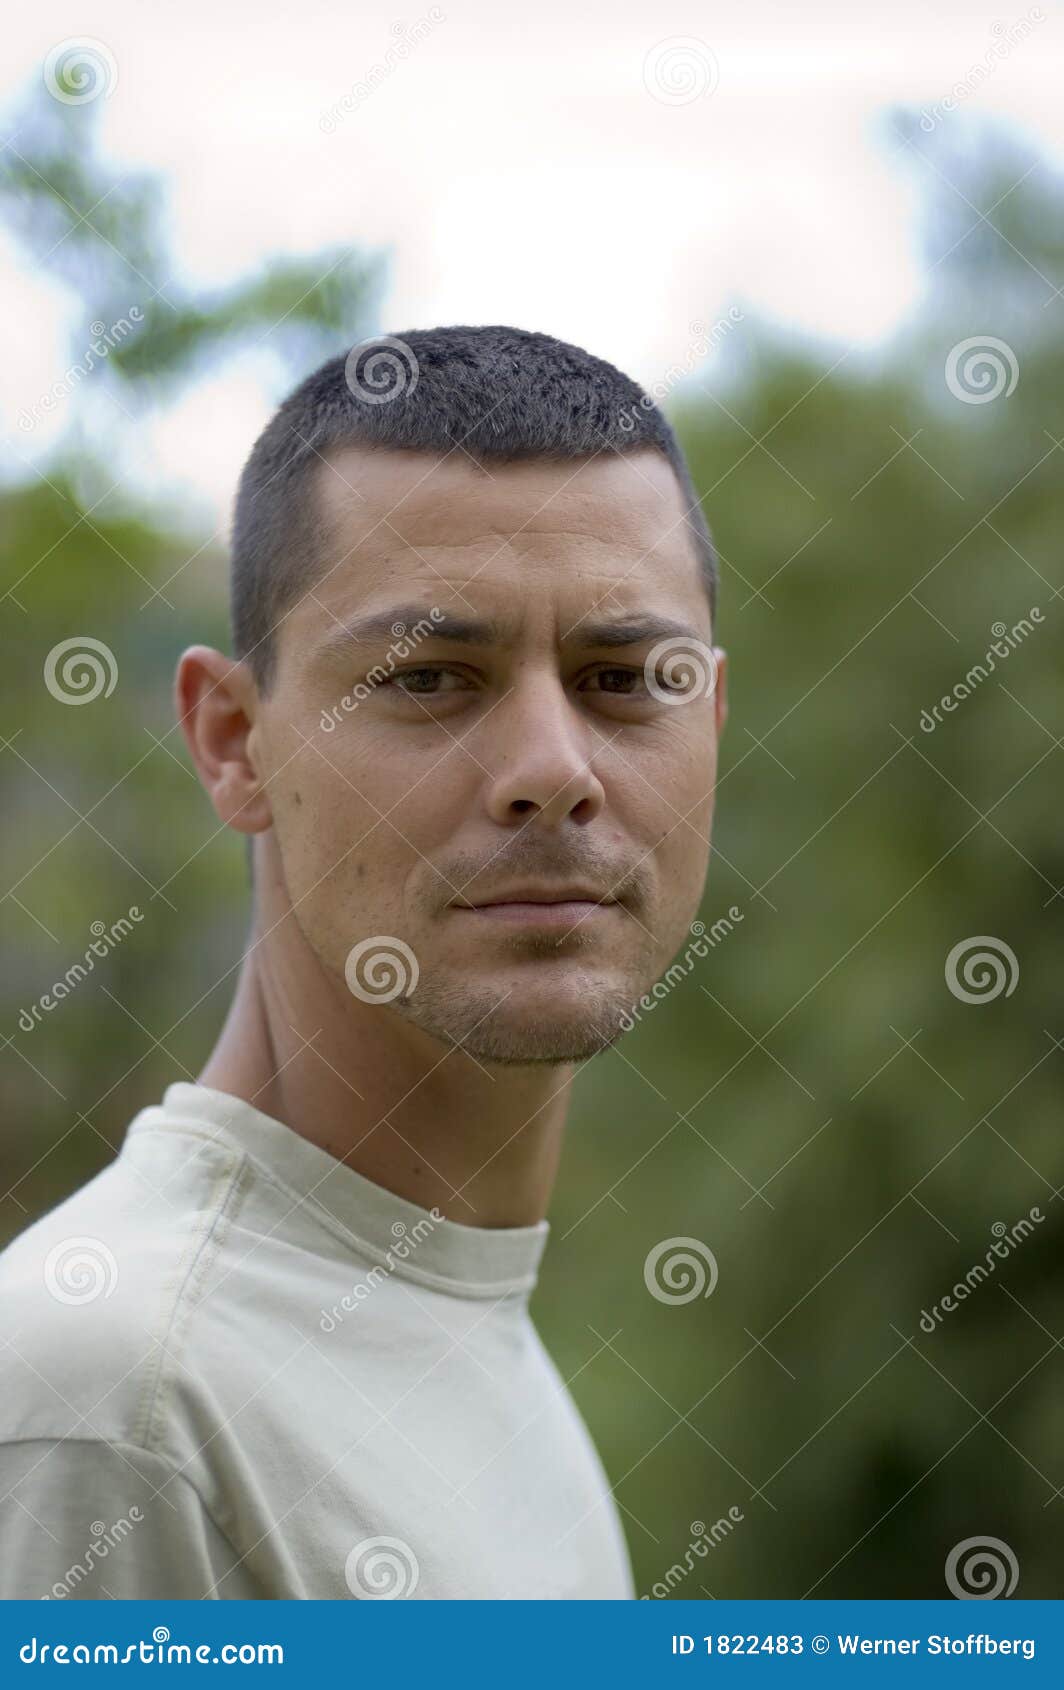 Male Model stock image. Image of unshaven, outside, person - 1822483